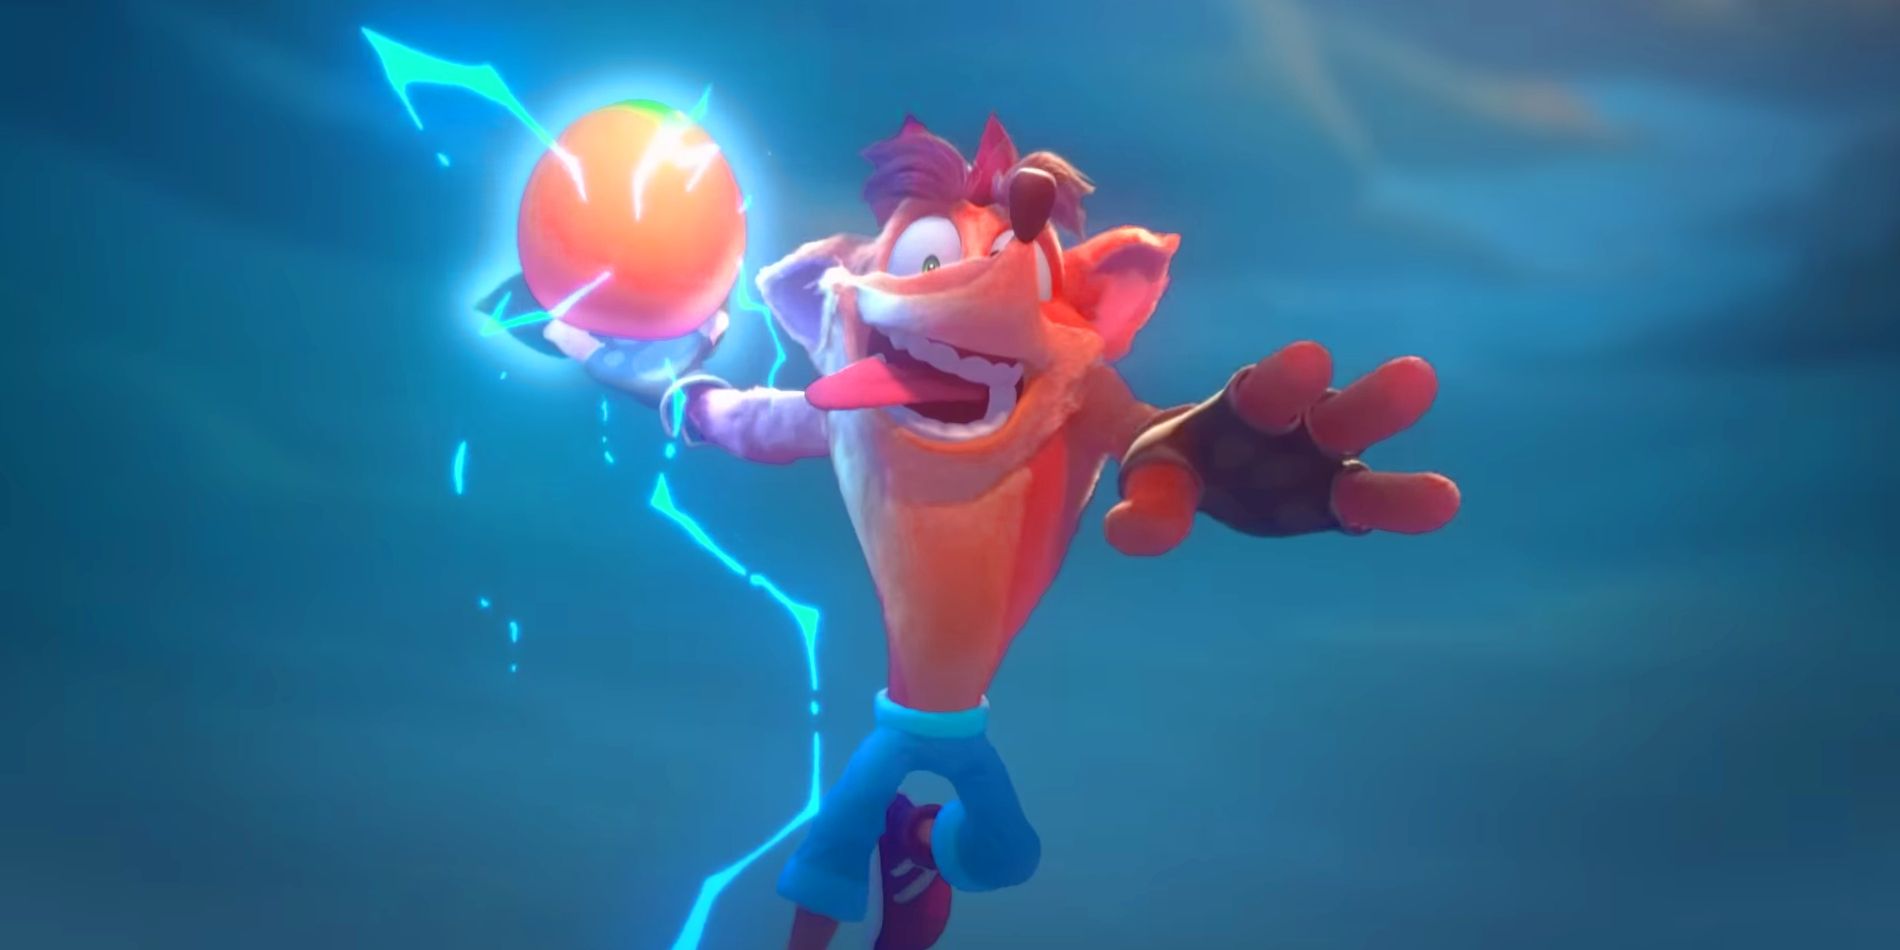 Image from the Crash Team Rumble trailer featuring Crash Bandicoot holding a Wumpa fruit encased in lightning as if he's about to slam dunk it into a basket. While wearing his trademark pants and his tongue hanging out.